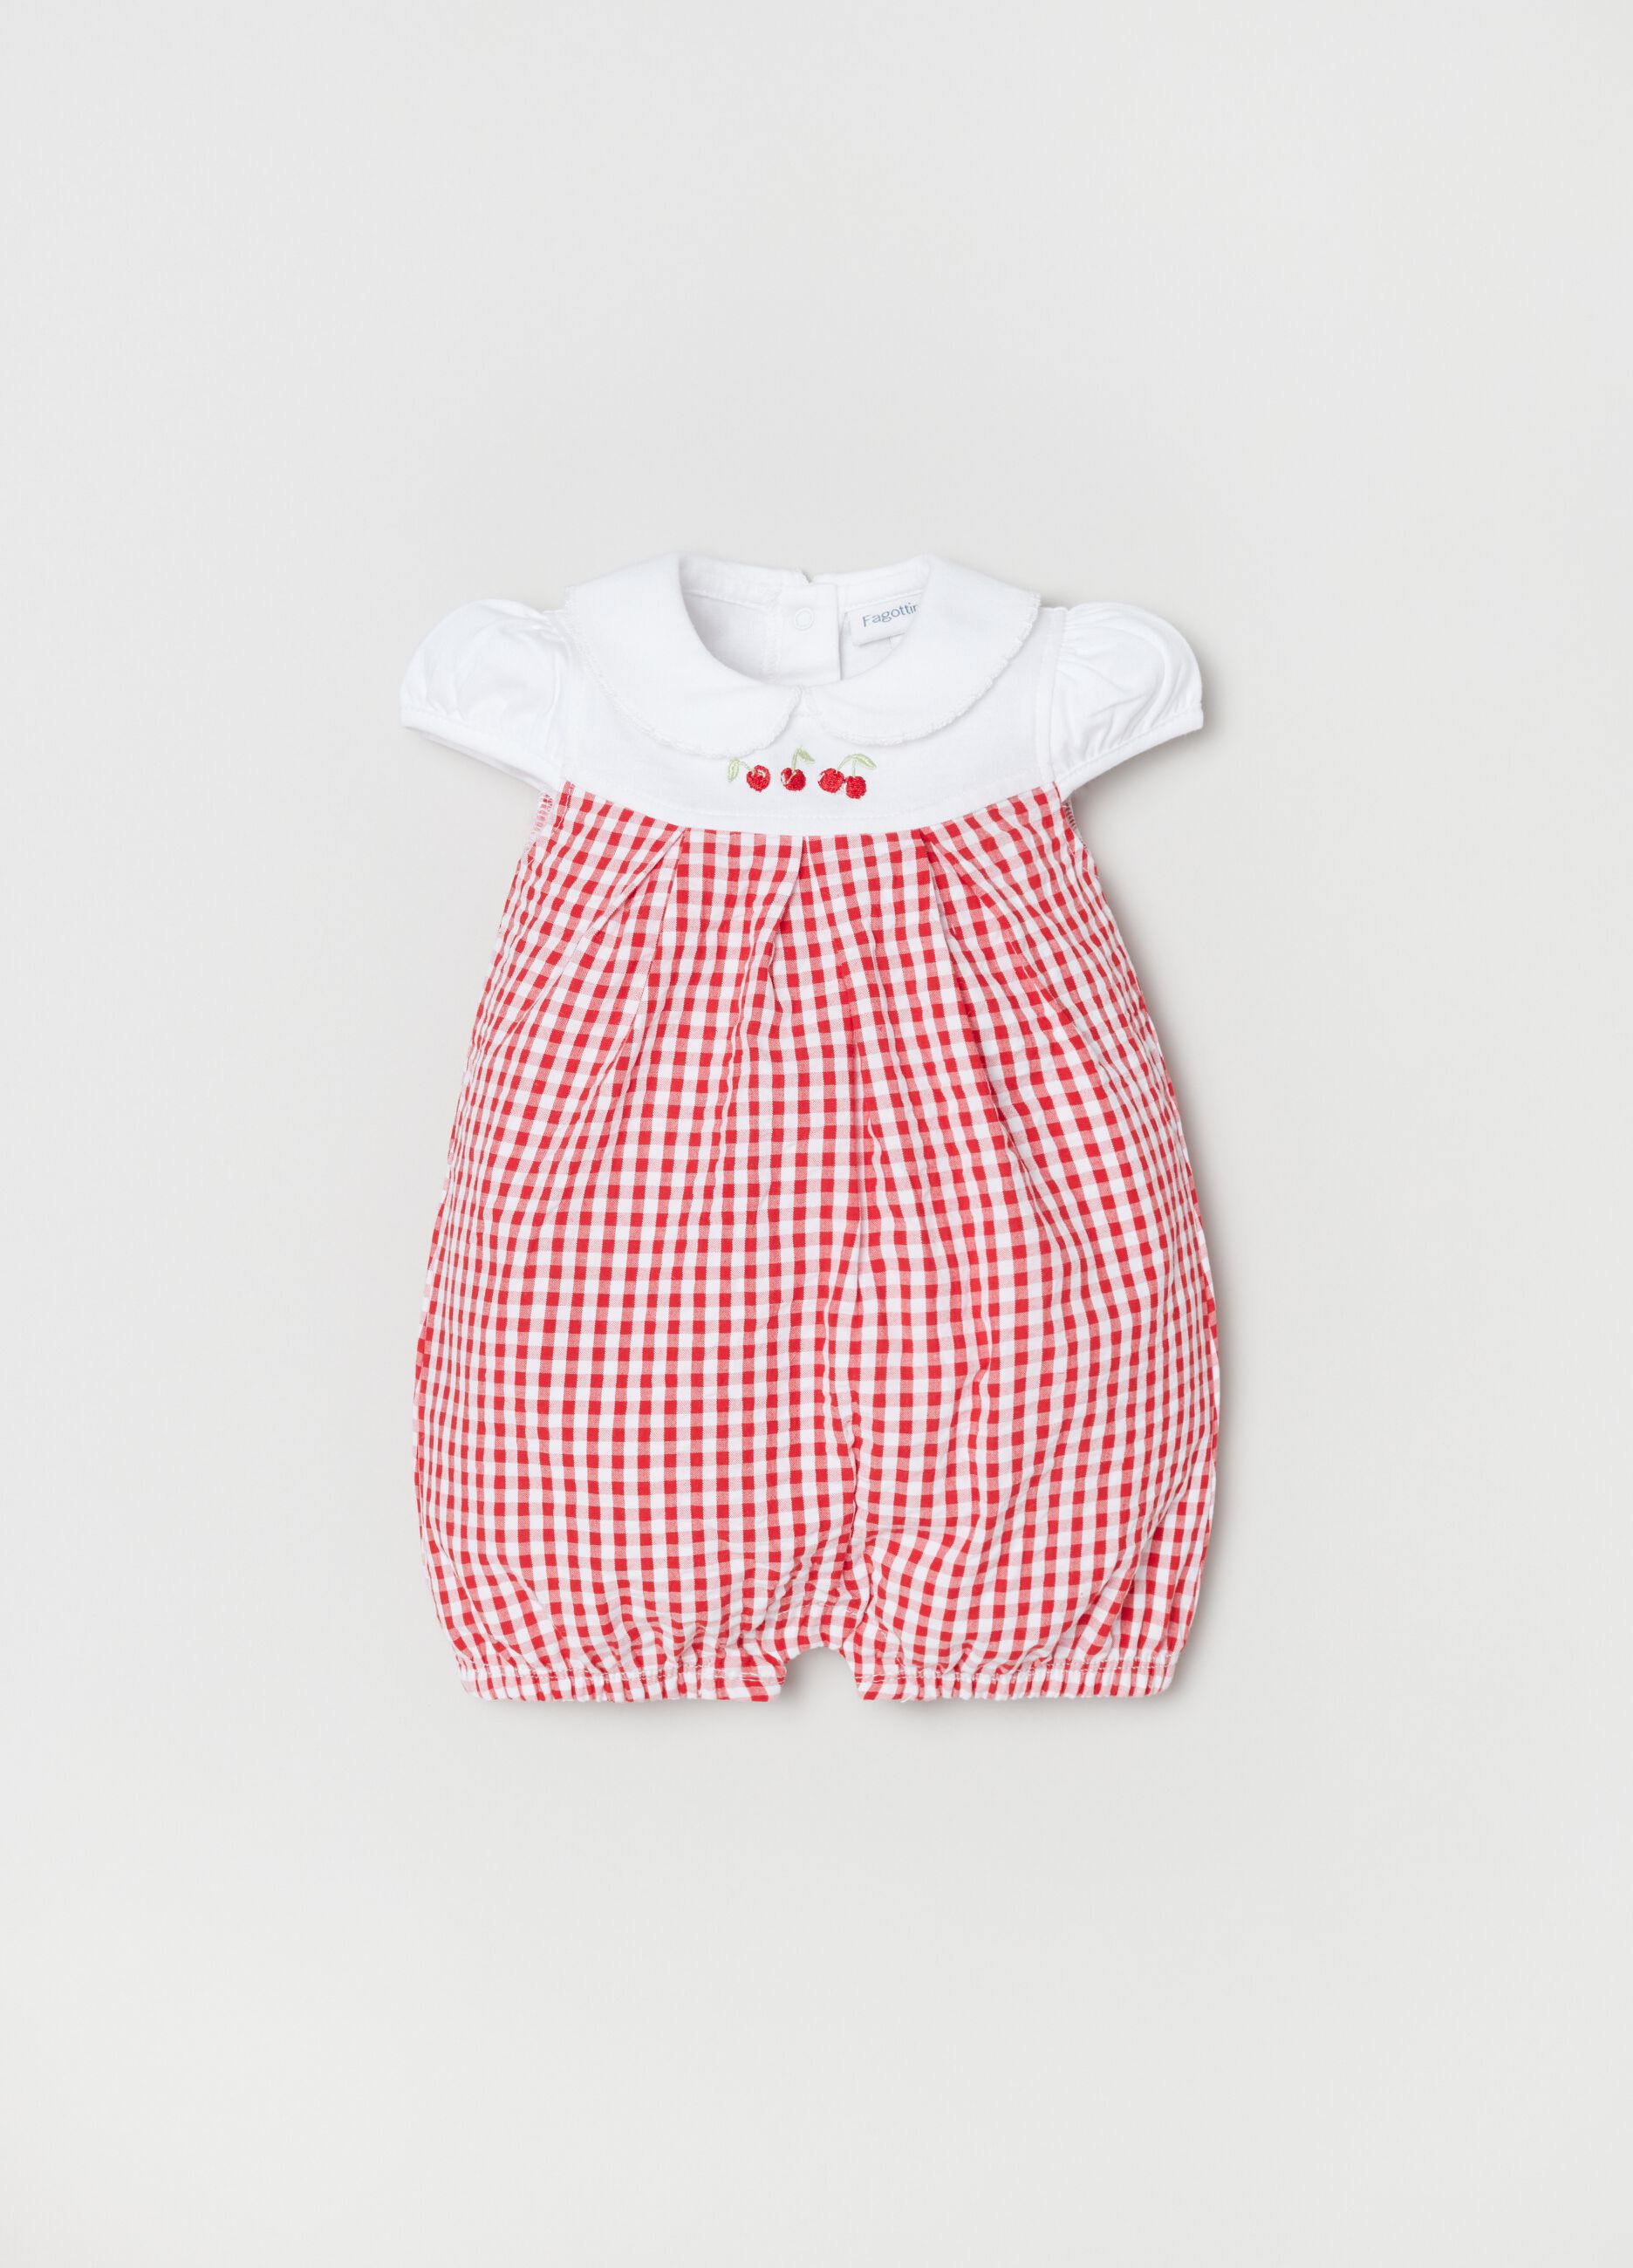 Gingham romper suit with cherries embroidery